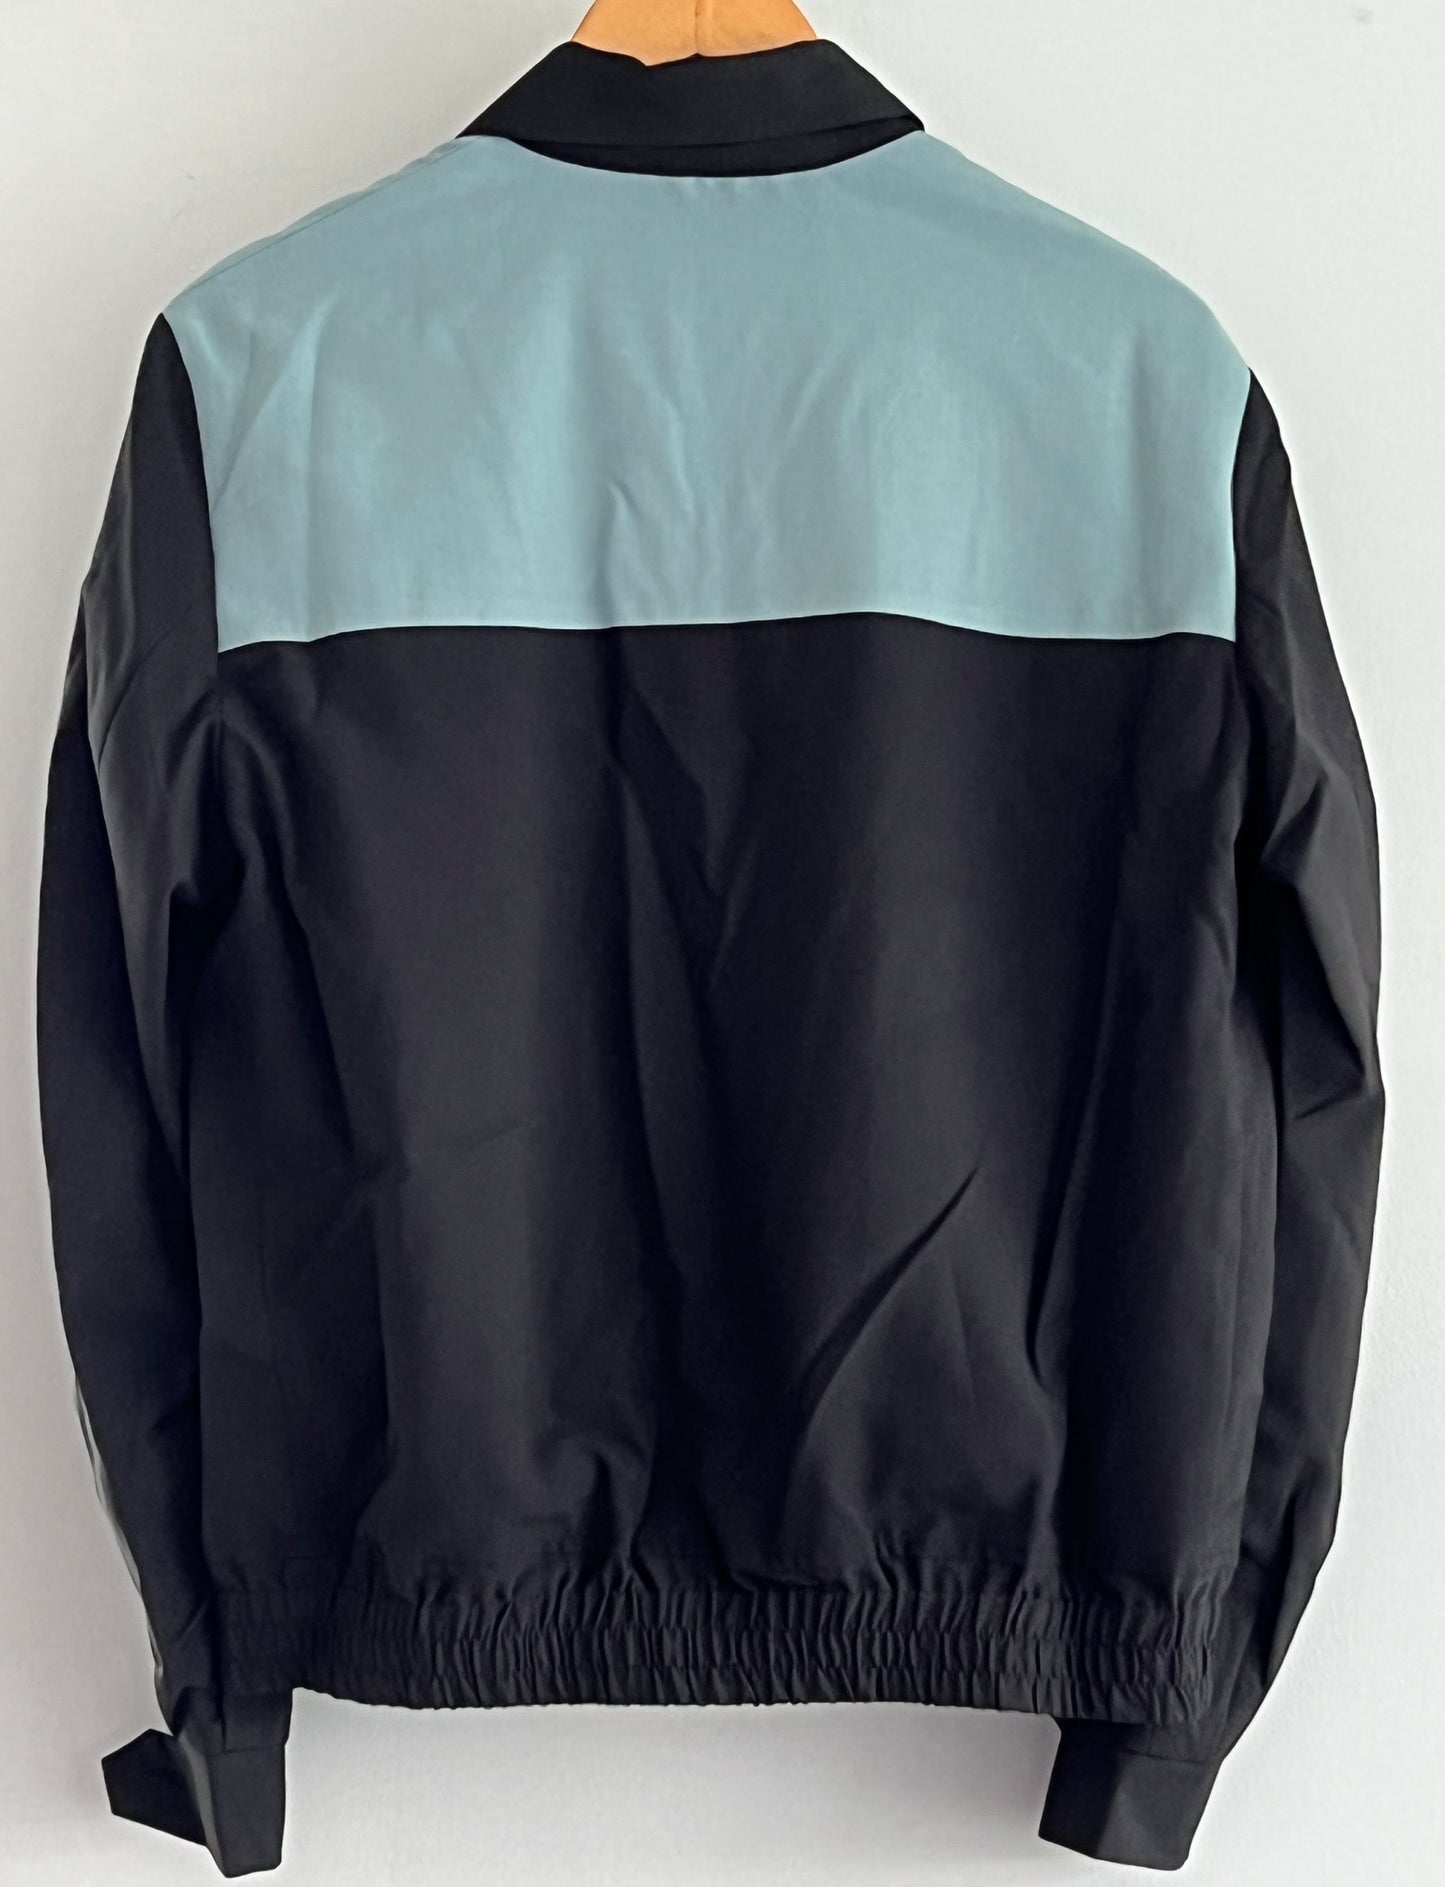 Mens 1950s vintage style gab jacket in black with powder blue contrast front and back M to 2XL